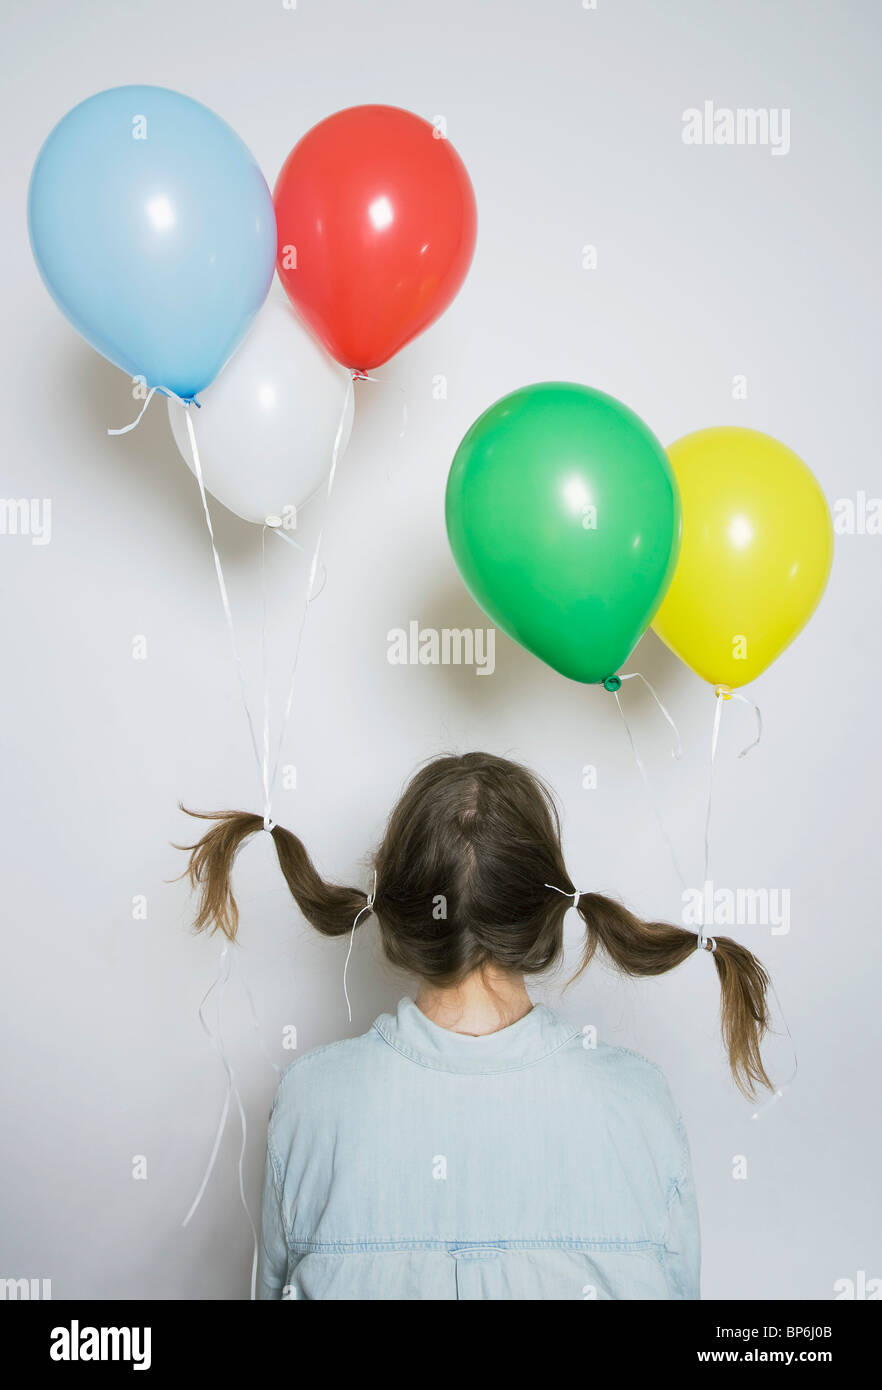 Colored party balloon tied with string 22069332 PNG